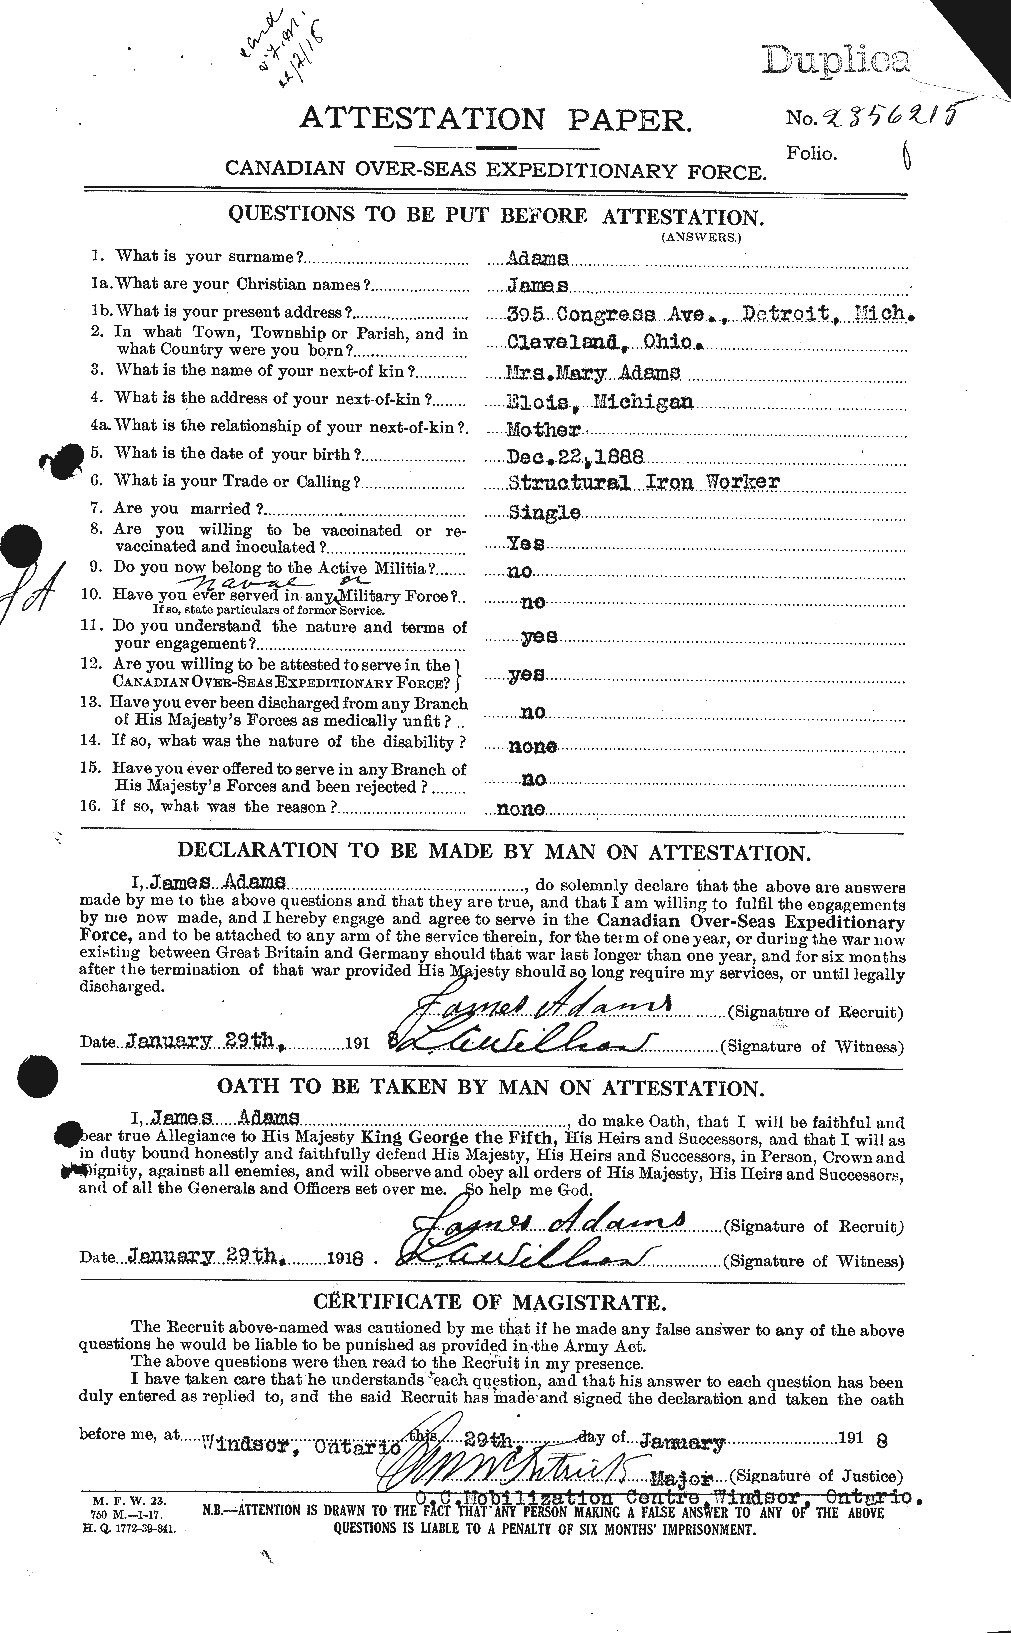 Personnel Records of the First World War - CEF 203229a